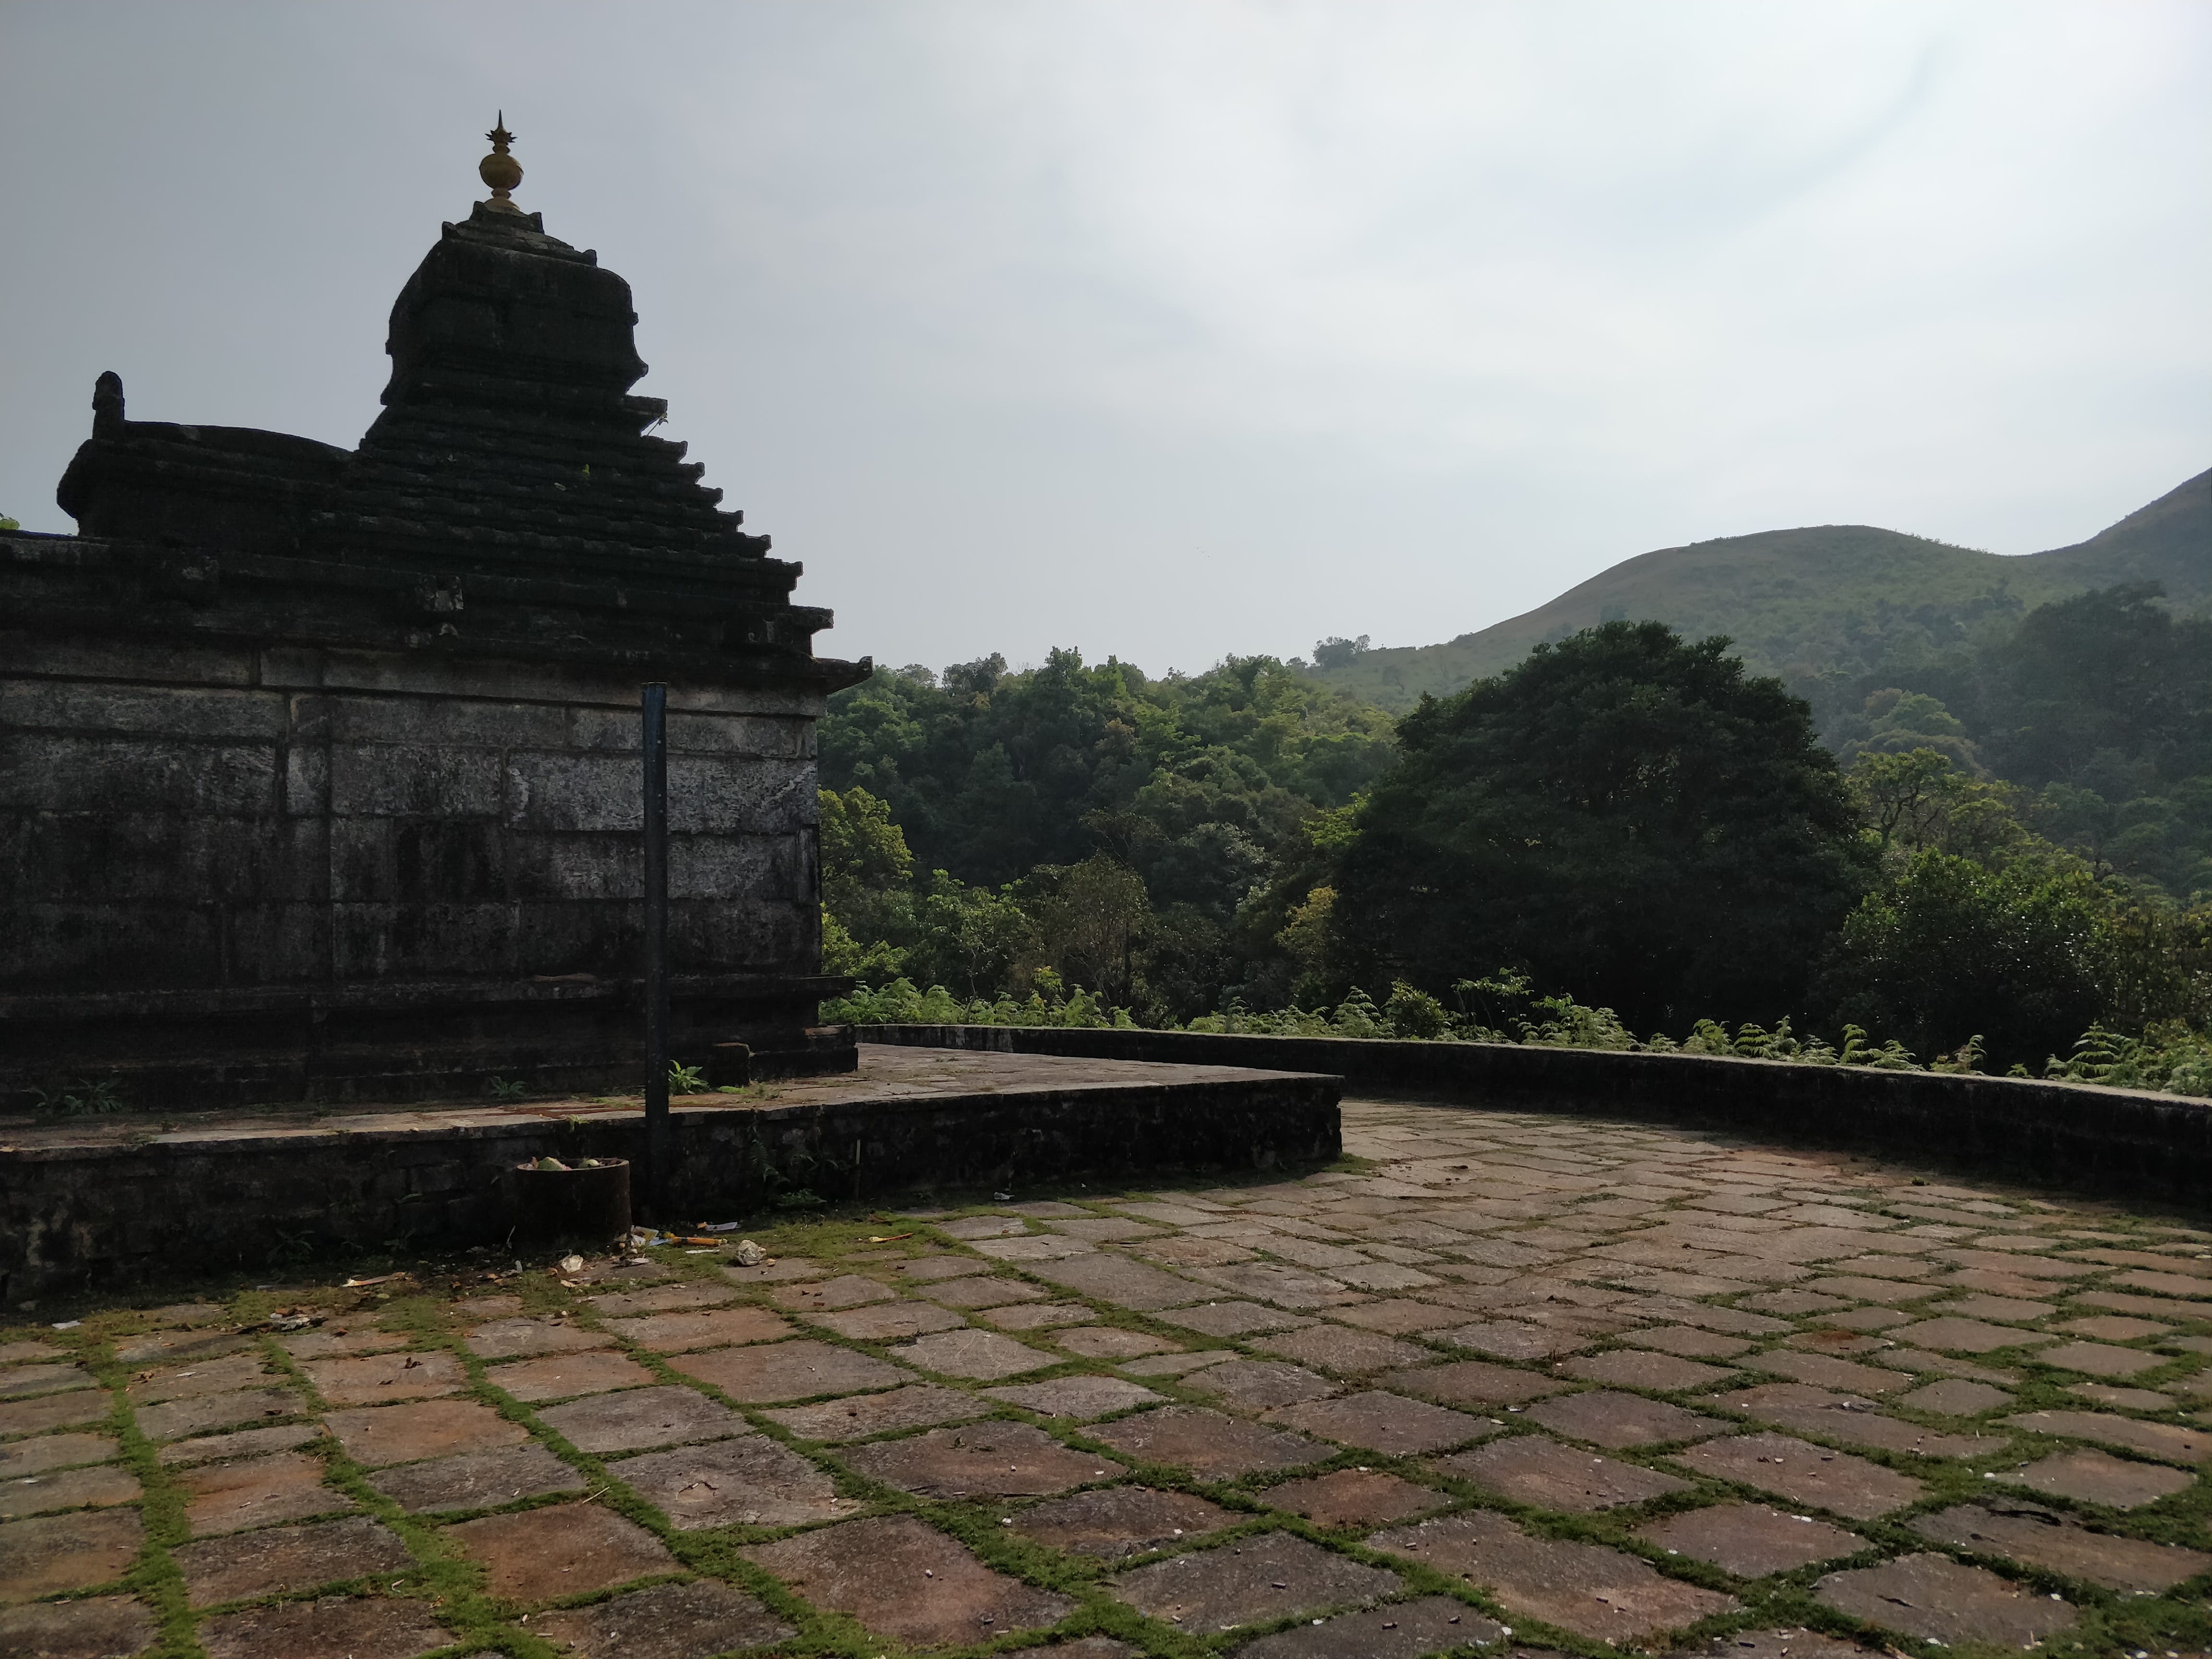 second temple of the day - Bettada Byraweshwara temple